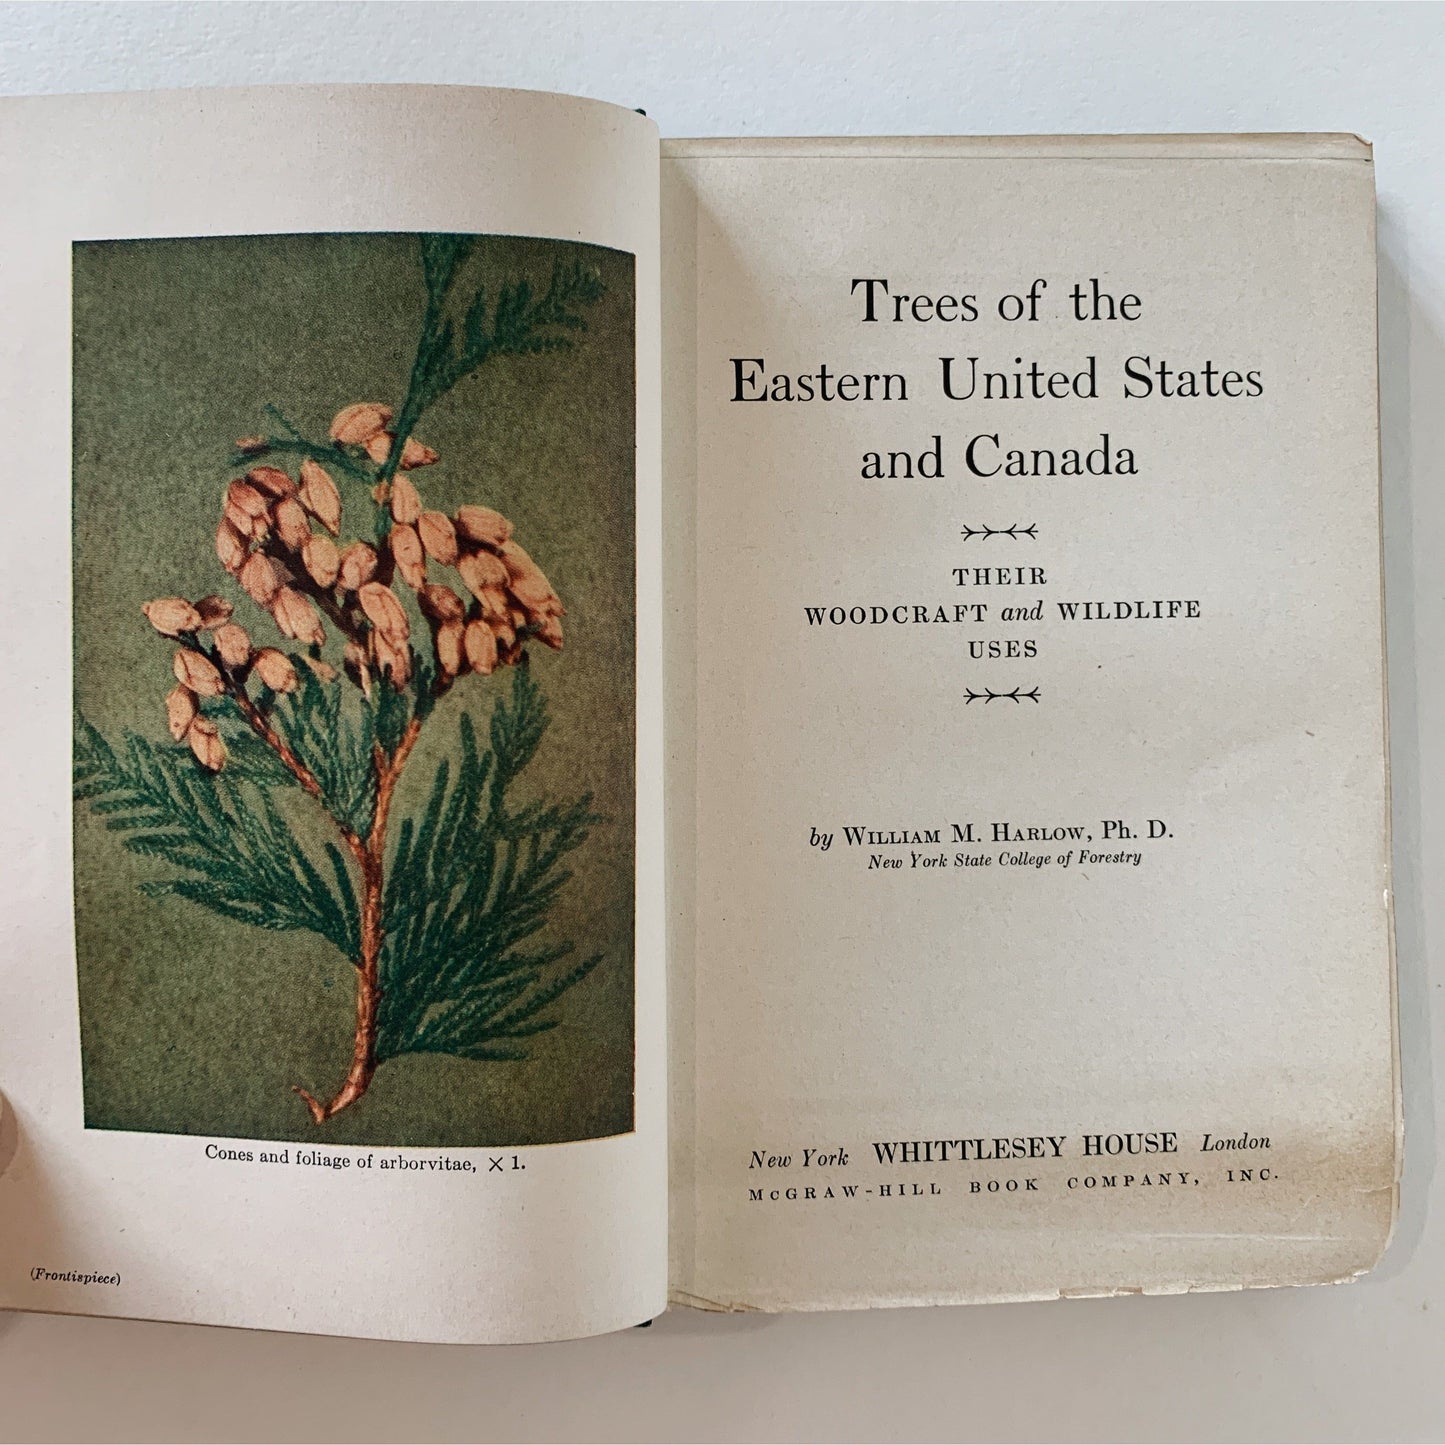 Trees of the Eastern United States and Canada, 1942, Whittlesey House Field Guide